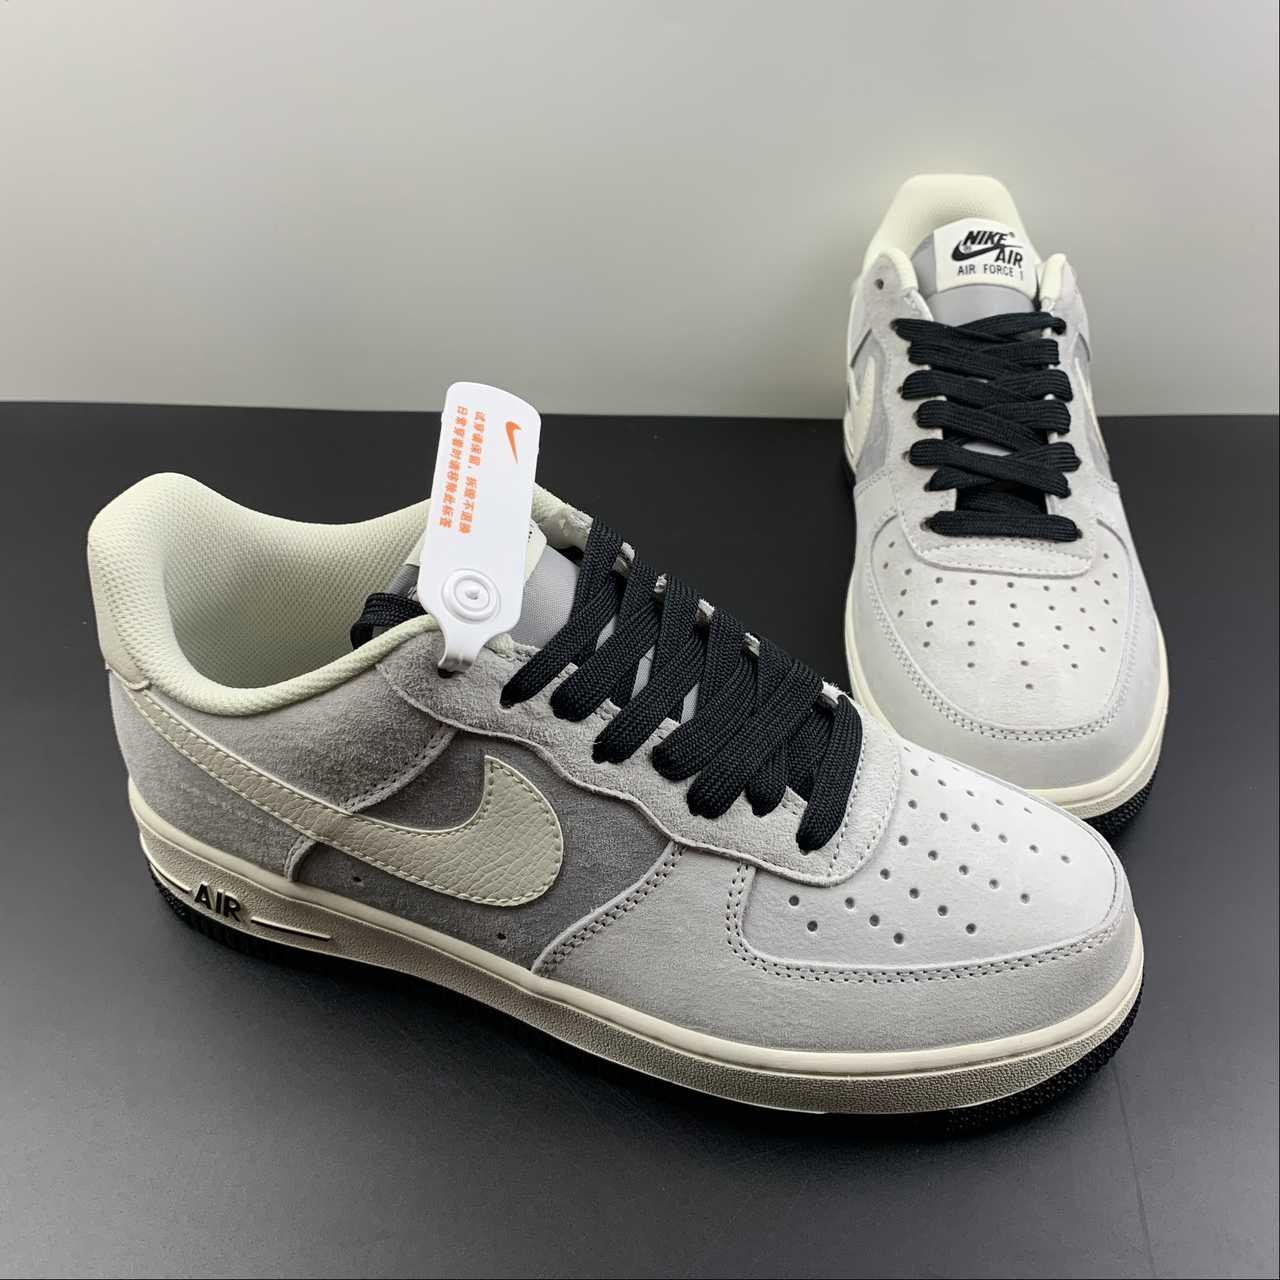      SHOES AIR FORCE 1 Air Force Low-Top Casual Board Shoes KT3396-225